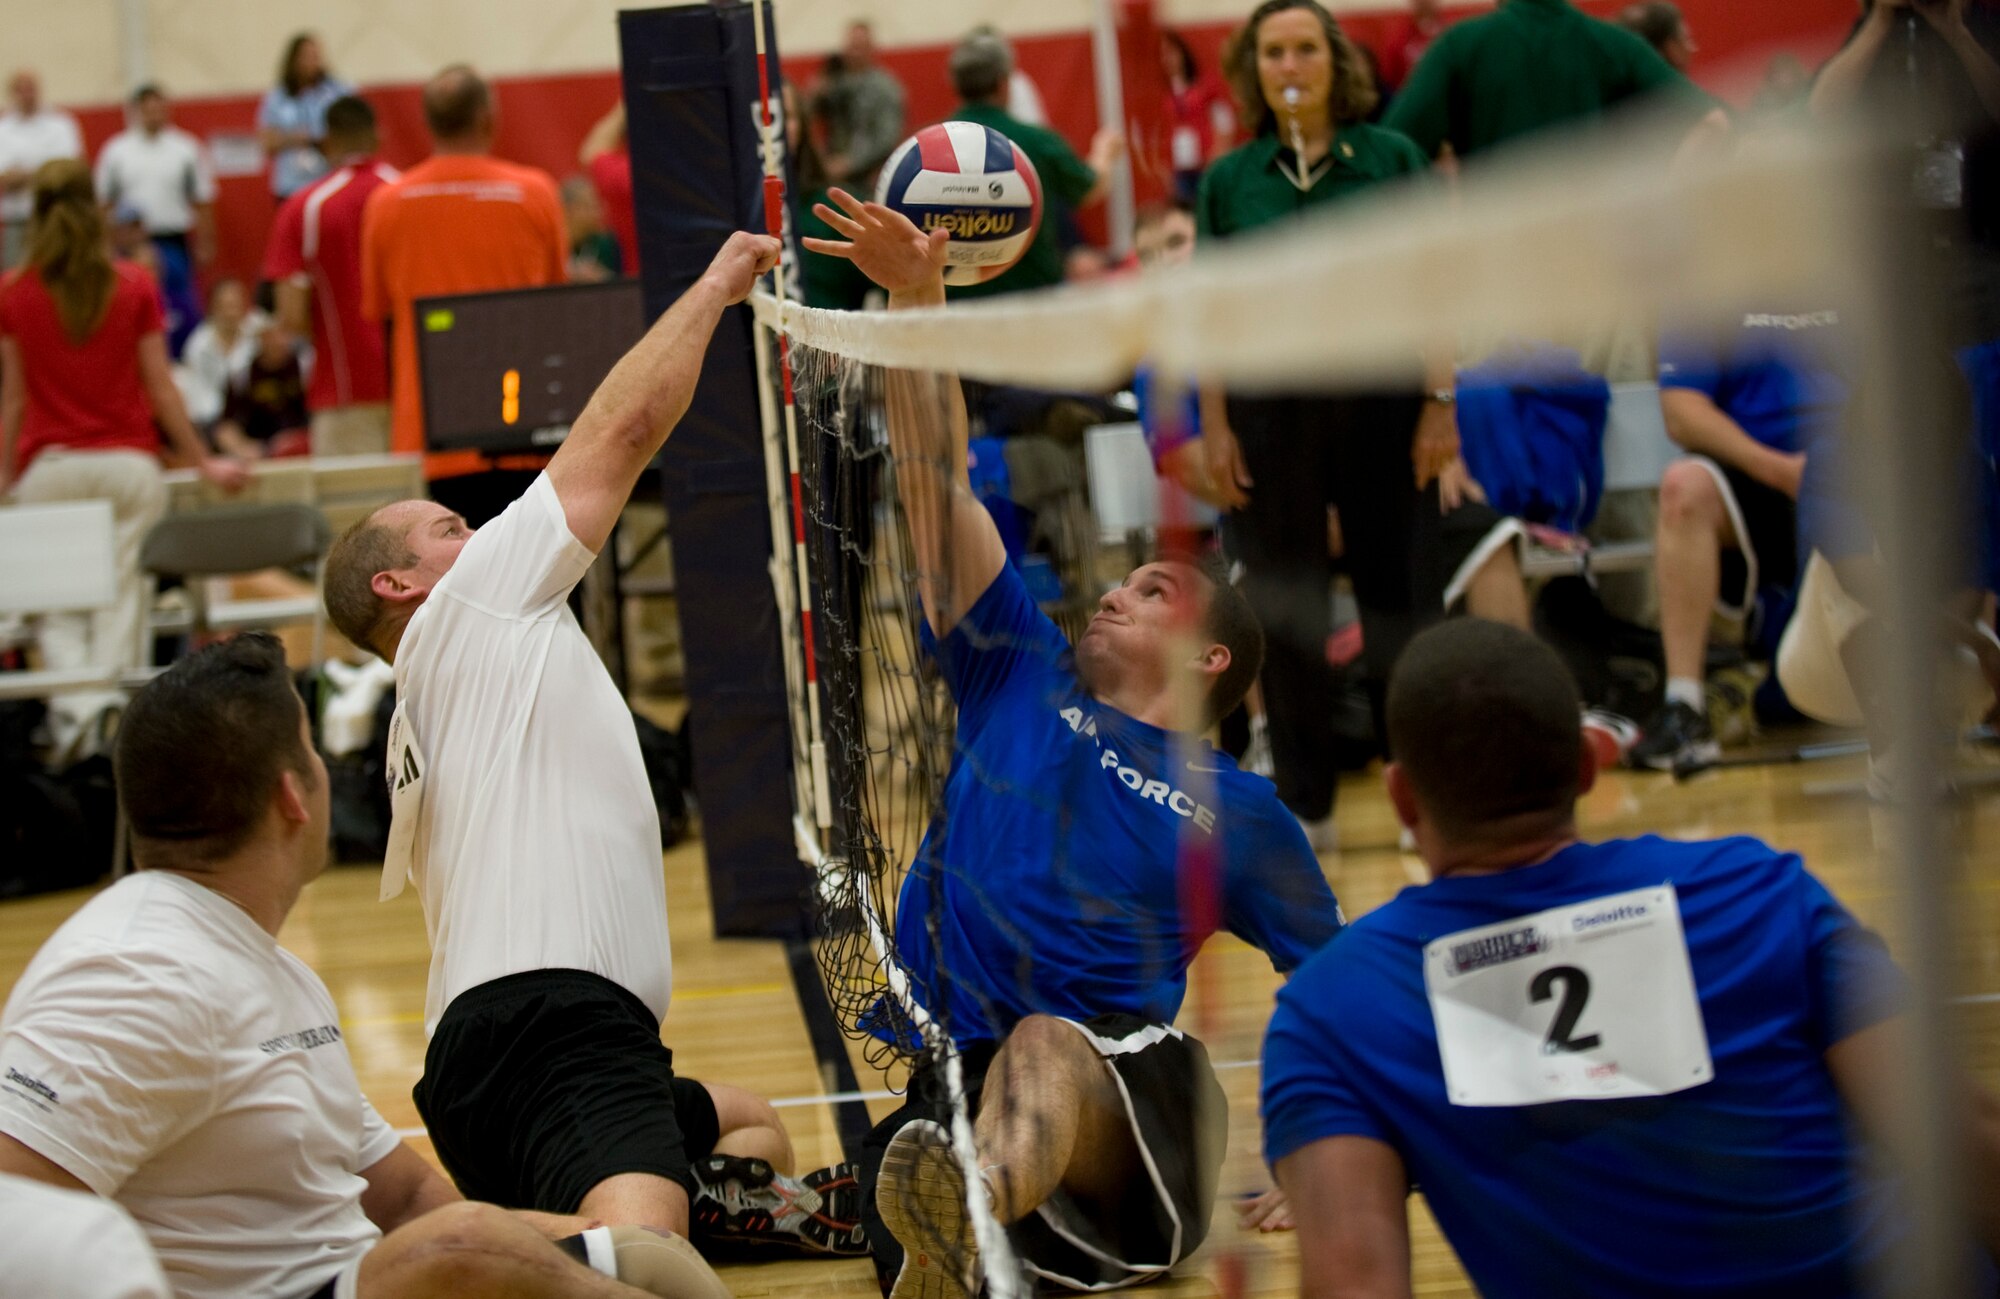 A member from the United States Special Operations Command teams knocks the ball past an Air Force defender during sitting volleyball competition at the 2011 Warrior Games in Colorado Springs, Colo. The Air Force played the U.S. Special Operations Command team, losing the series 2 games to 1. (U.S. Air Force photo/Staff Sgt. Christopher Griffin)